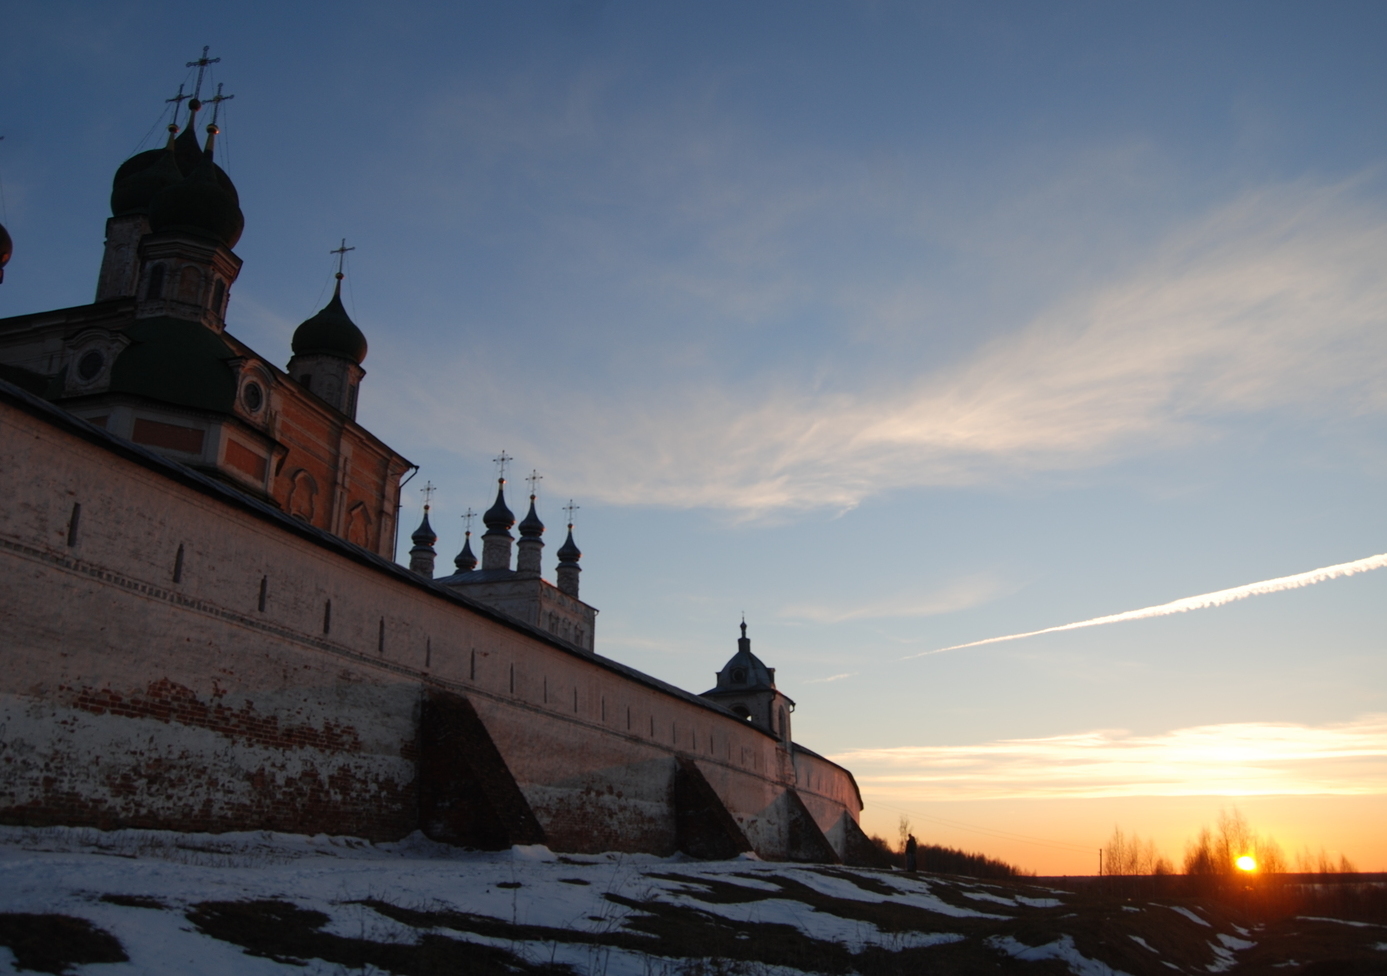 ne of the most ancient monasteries of Russia - Goritsky Assumption